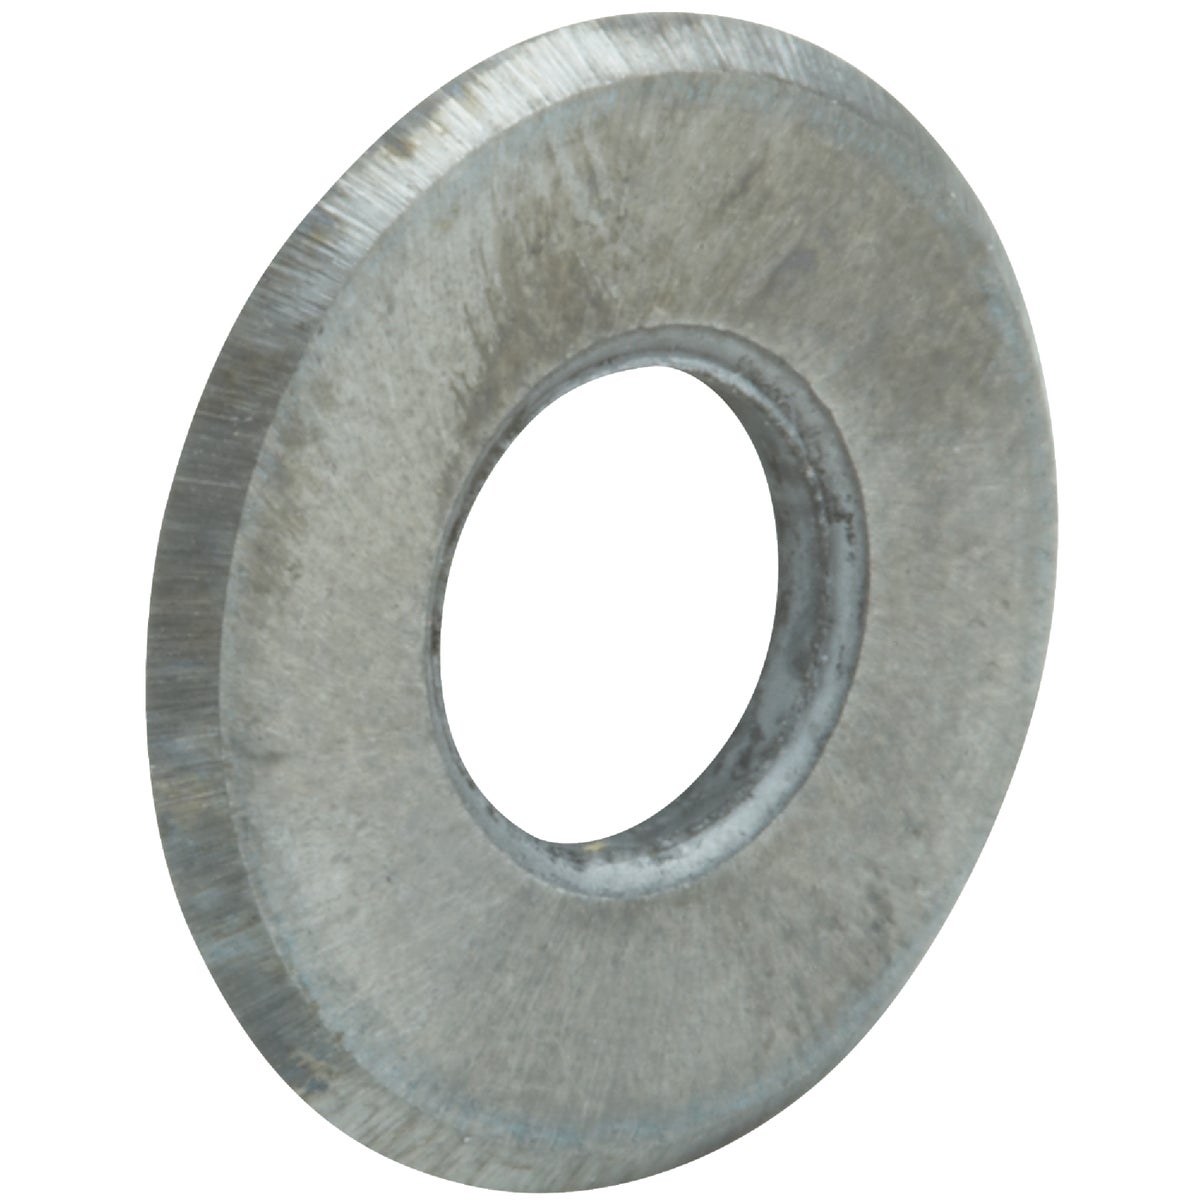 Item 317608, Replacement tile cutter wheel for Do it 12 In. tile cutter.